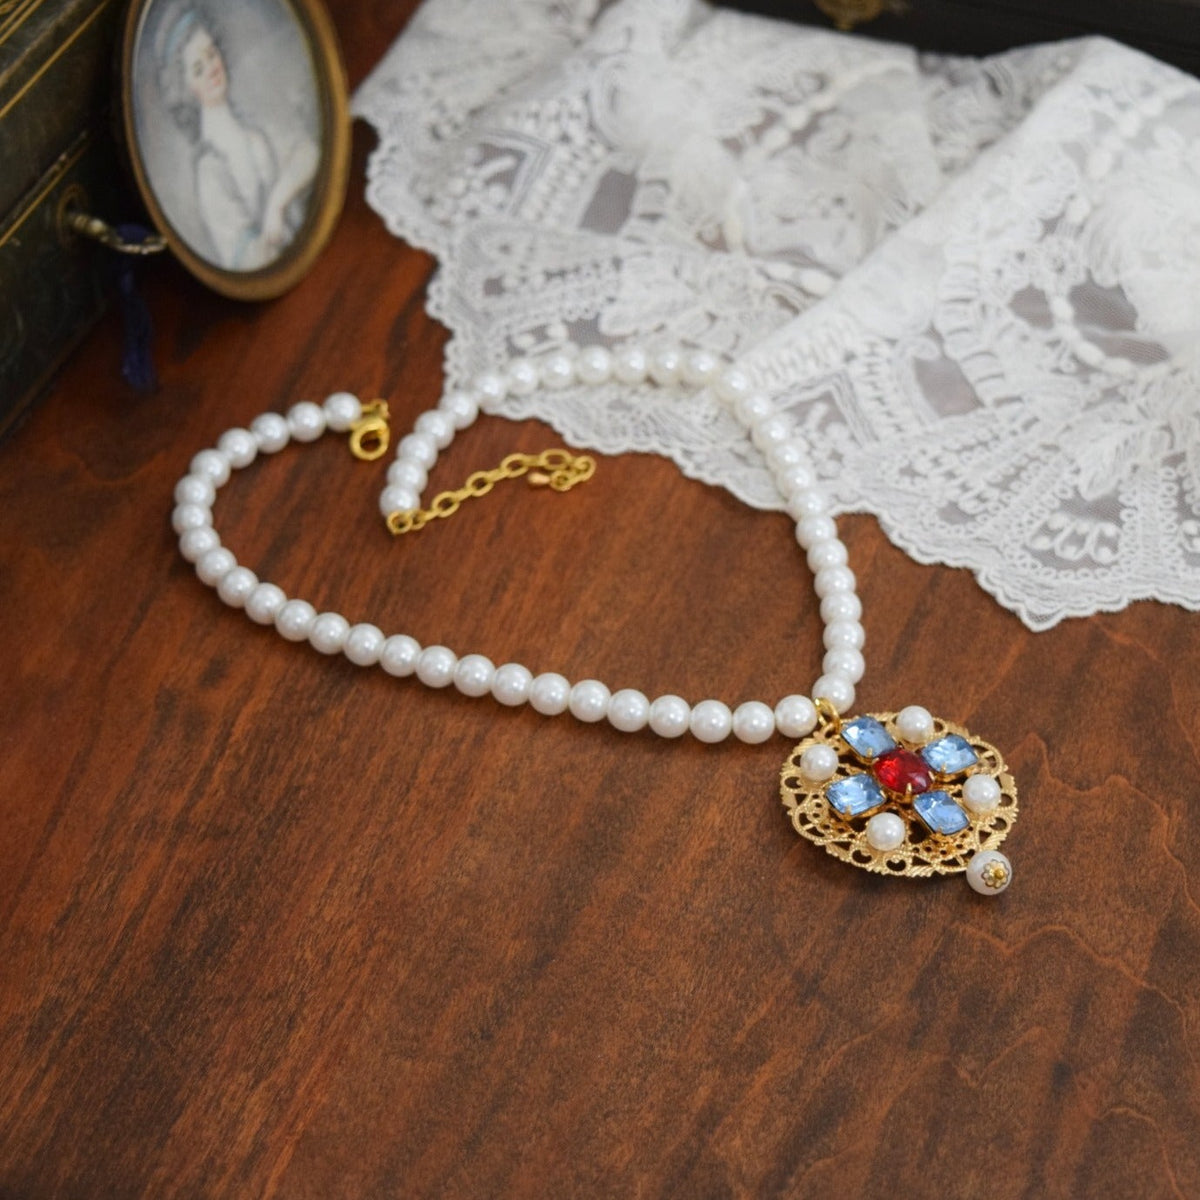 Renaissance Pendant or Necklace - Blue, Red, and Pearl on Filigree ...